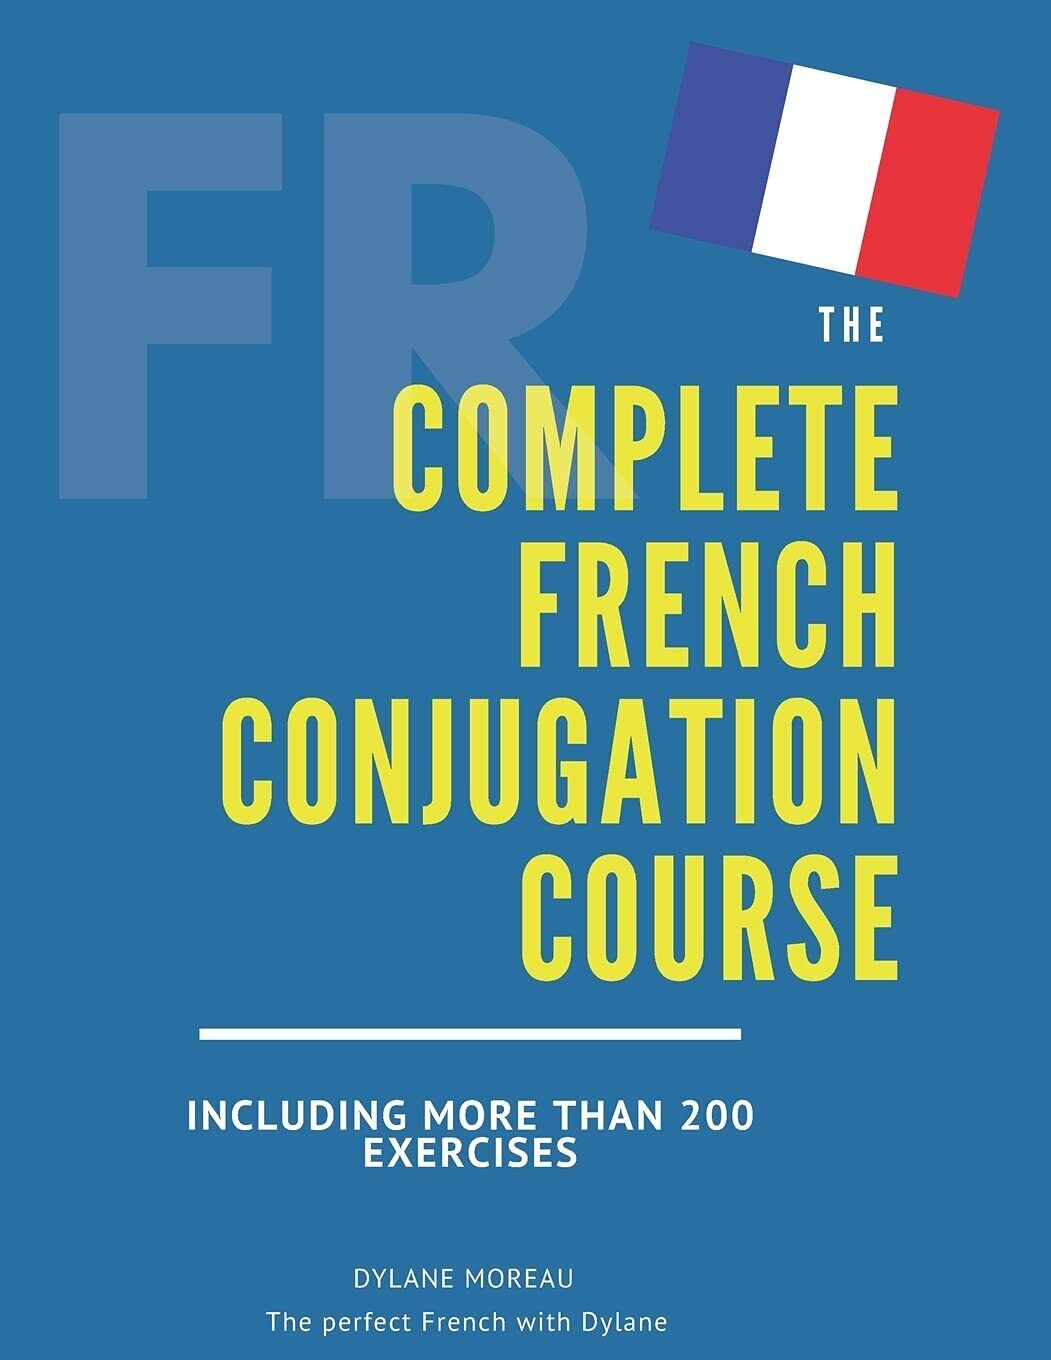 The Complete French Conjugation Course Master the French Conjugation in One Book libro usato